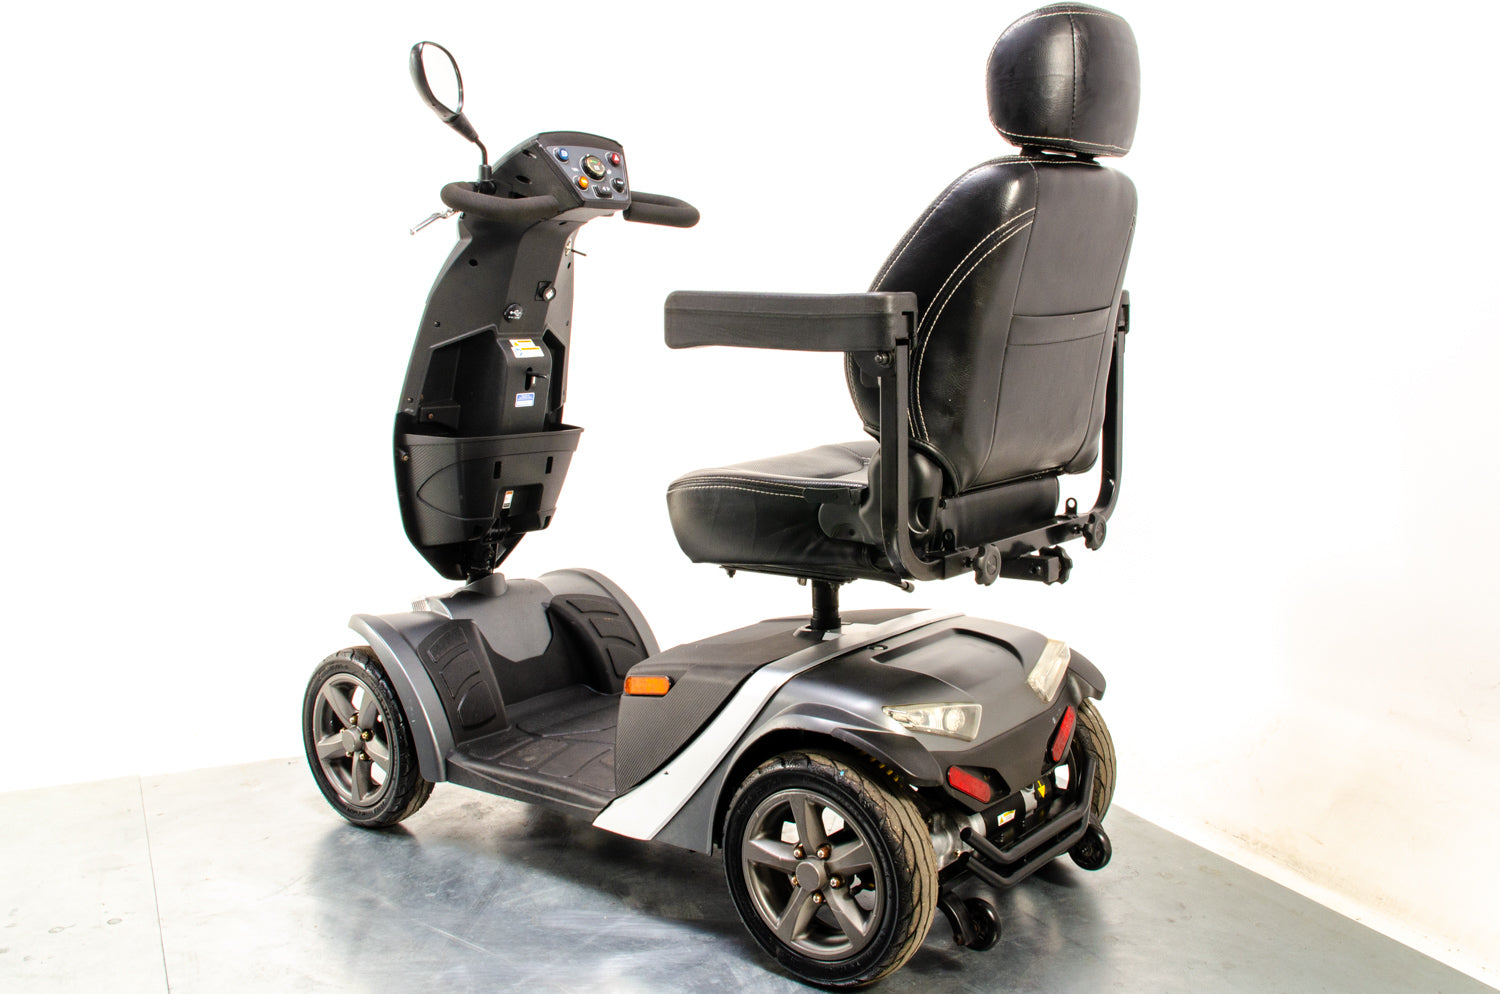 Rascal Vecta Sport Compact Used Electric Mobility Scooter 8mph Max Grip Suspension All-Terrain Road Legal Grey 13088